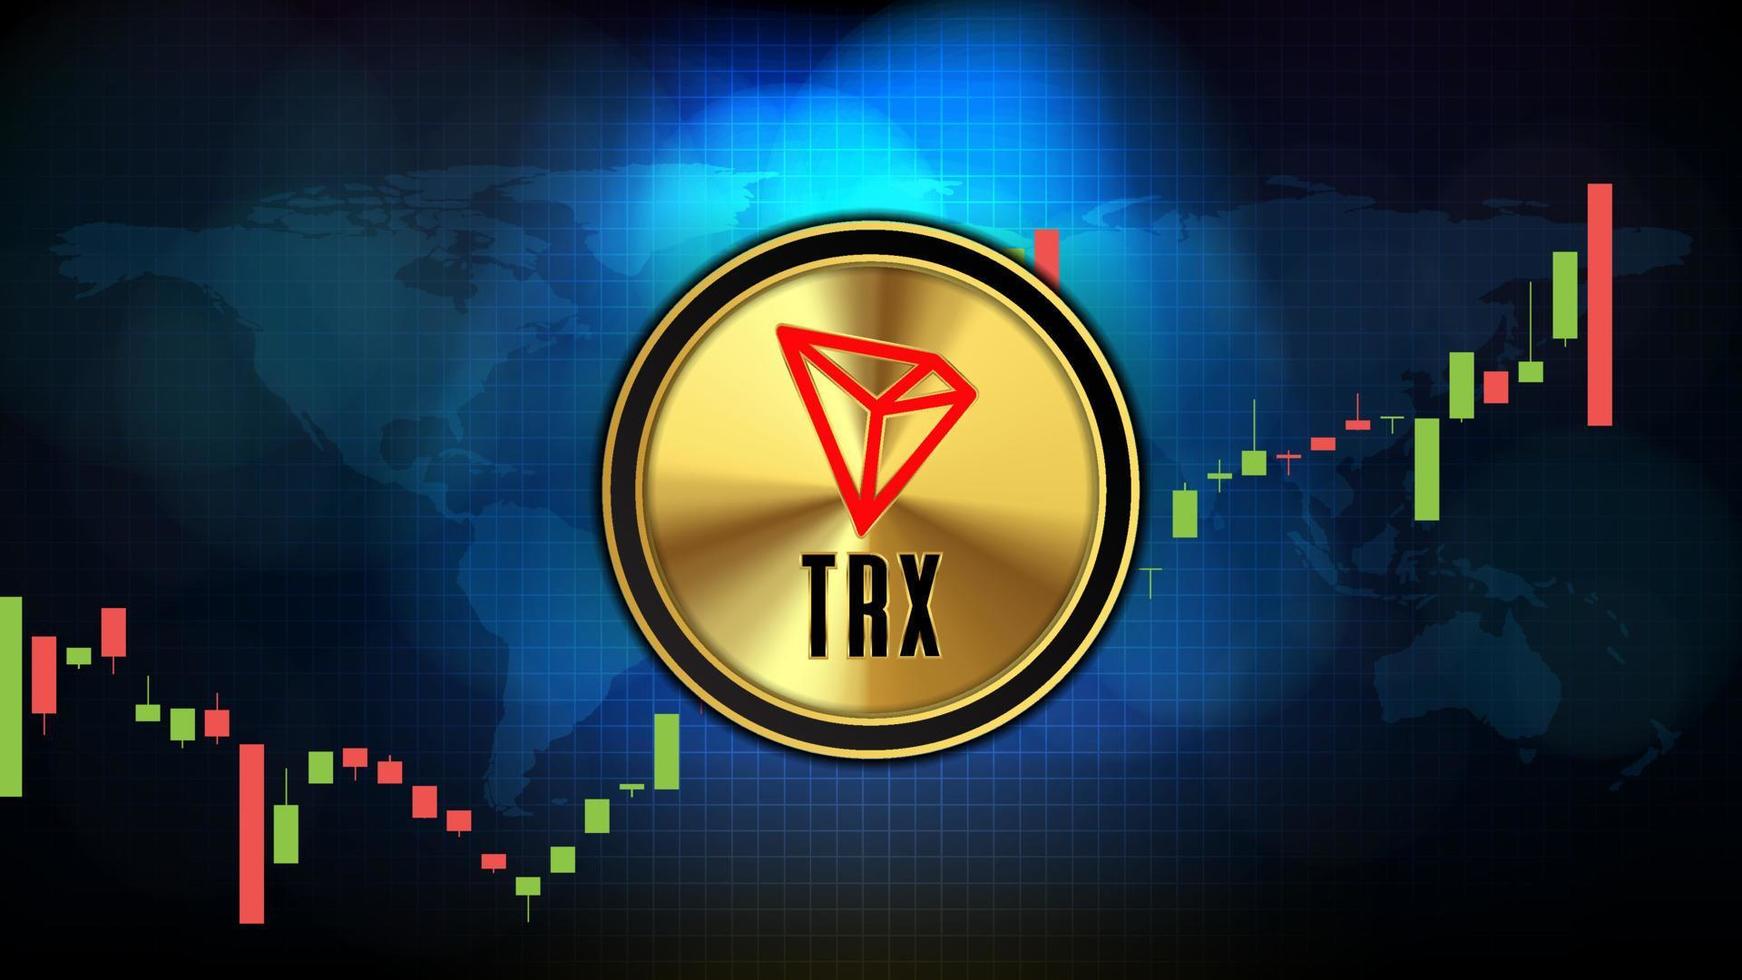 abstract futuristic technology background of TRON TRX Price graph Chart coin digital cryptocurrency vector